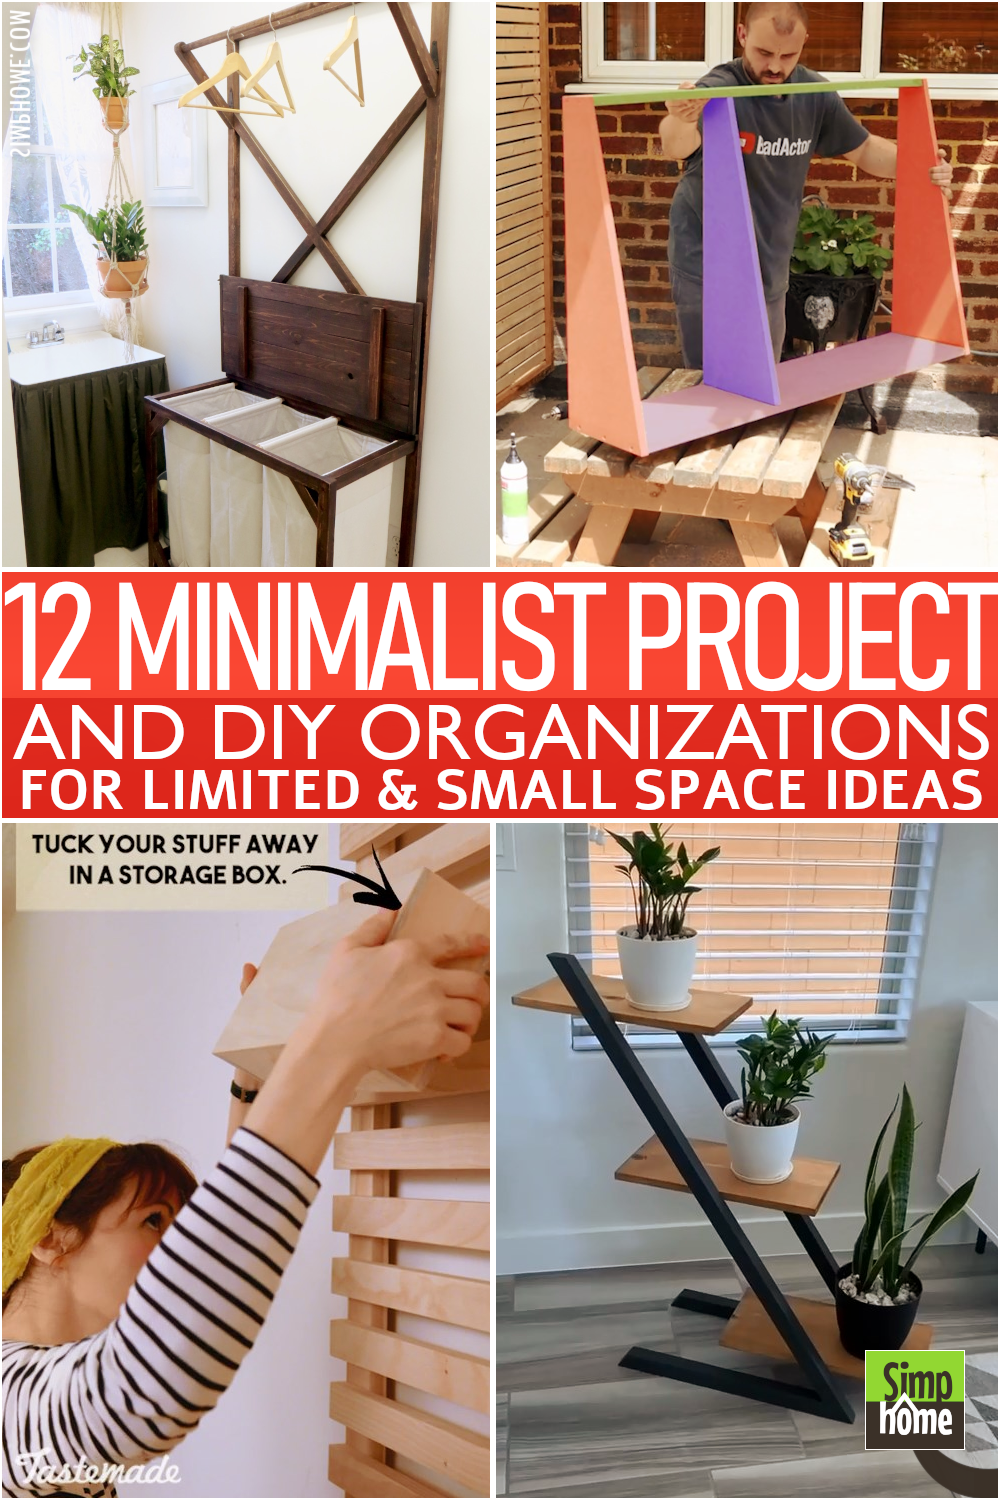 12 Minimalist Organization And DIY Project Ideas For Small Space Poster